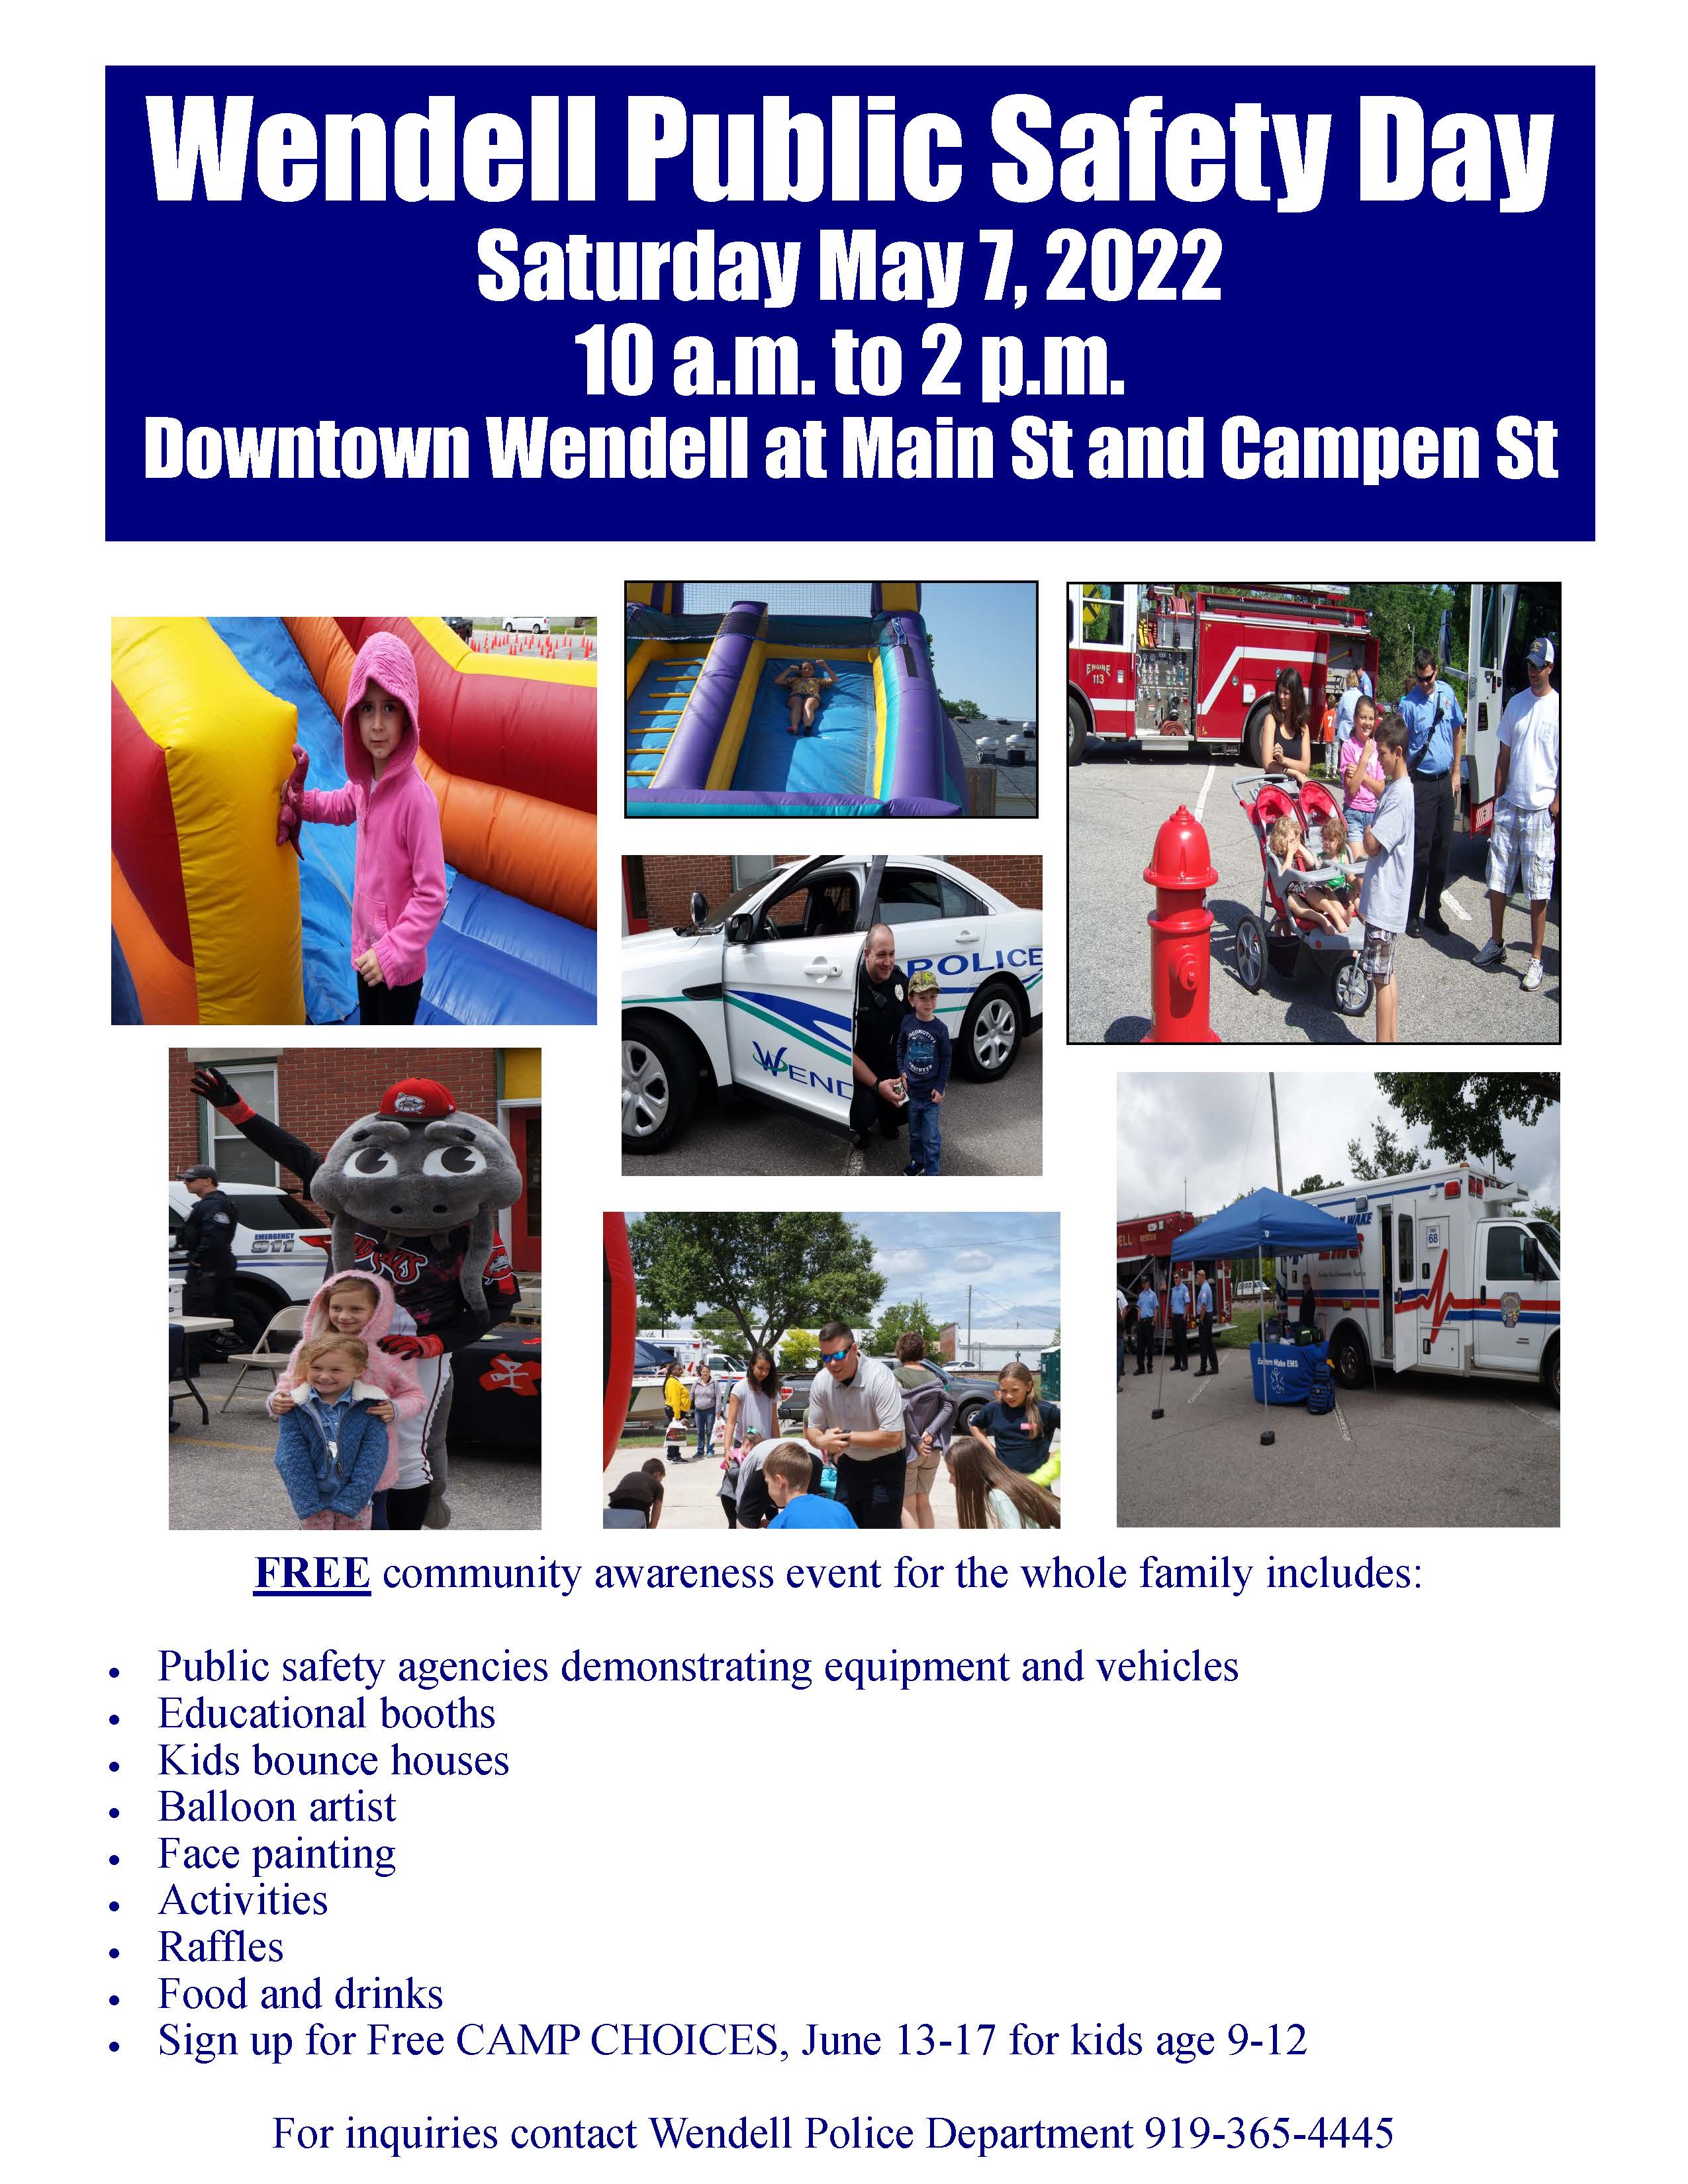 Wendell Public Safety Day May 7